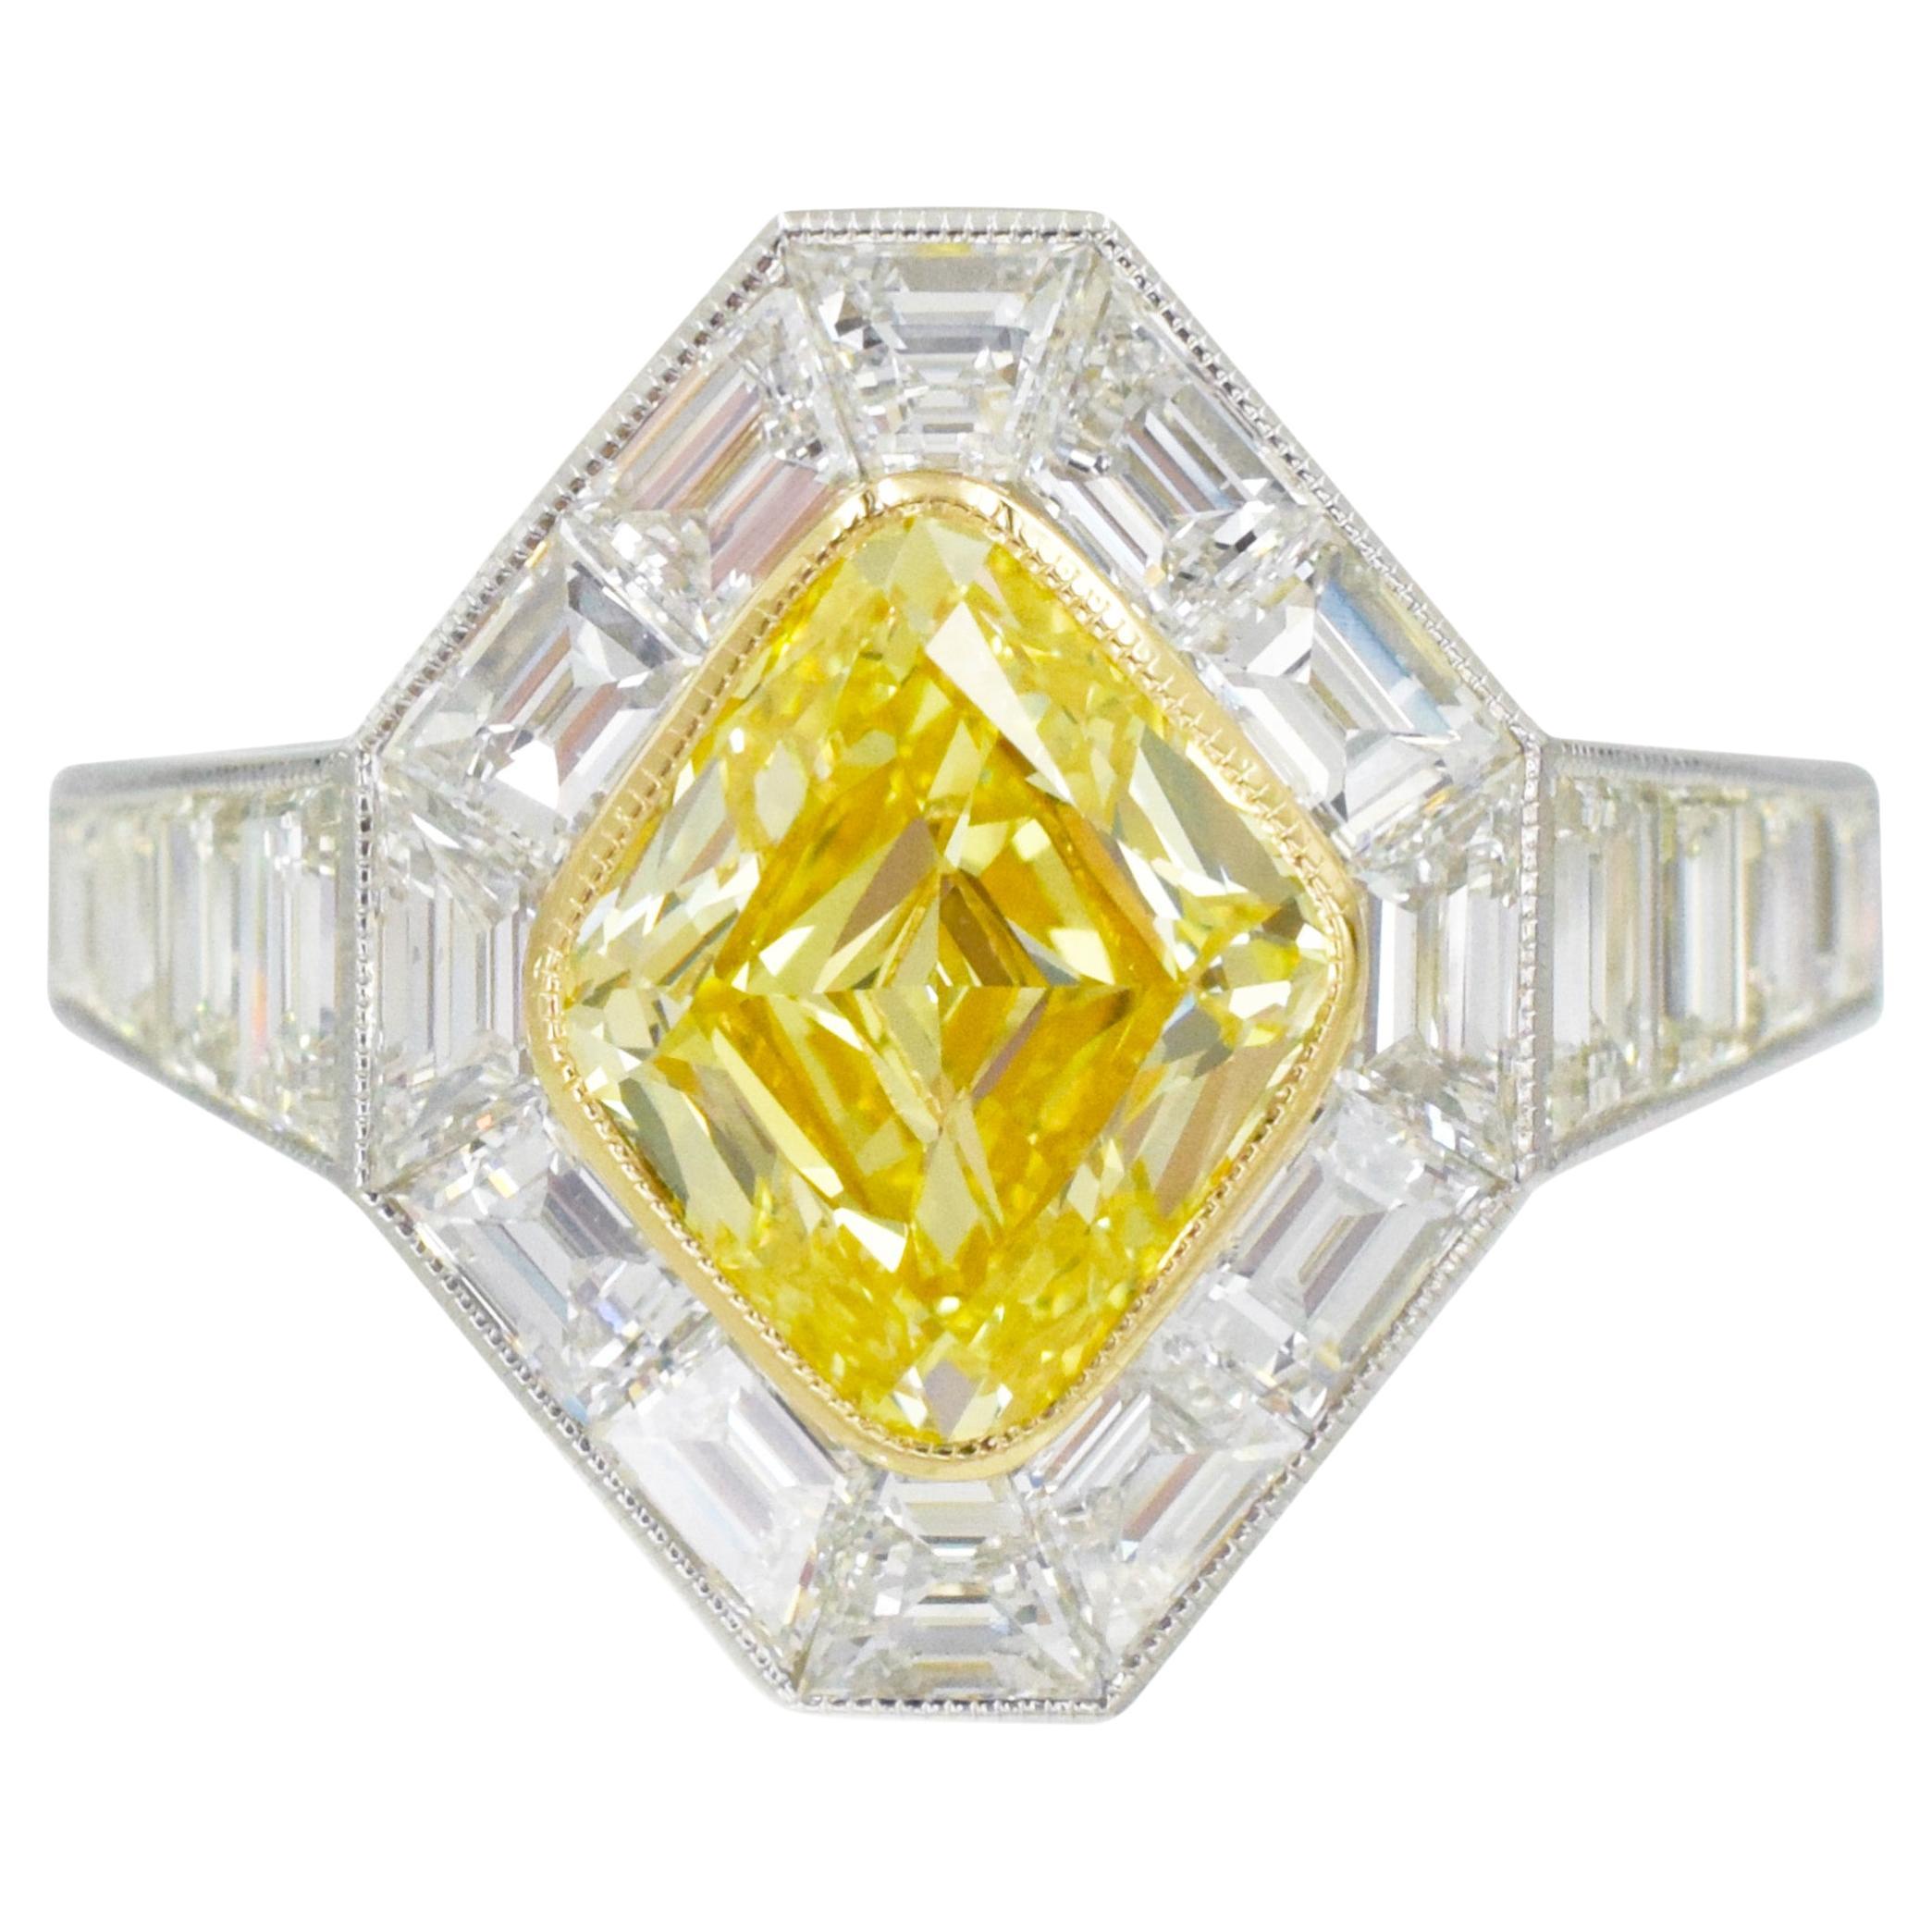 Nally Jewels Intense Fancy Yellow GIA certified Diamond Ring 
Diamond, Gold and Platinum Mounting.
This ring has 18 step cut diamonds weighing a total of 1.87 tcw all bezel set in platinum with a center diamond of 2.05 carat rhomboid brilliant